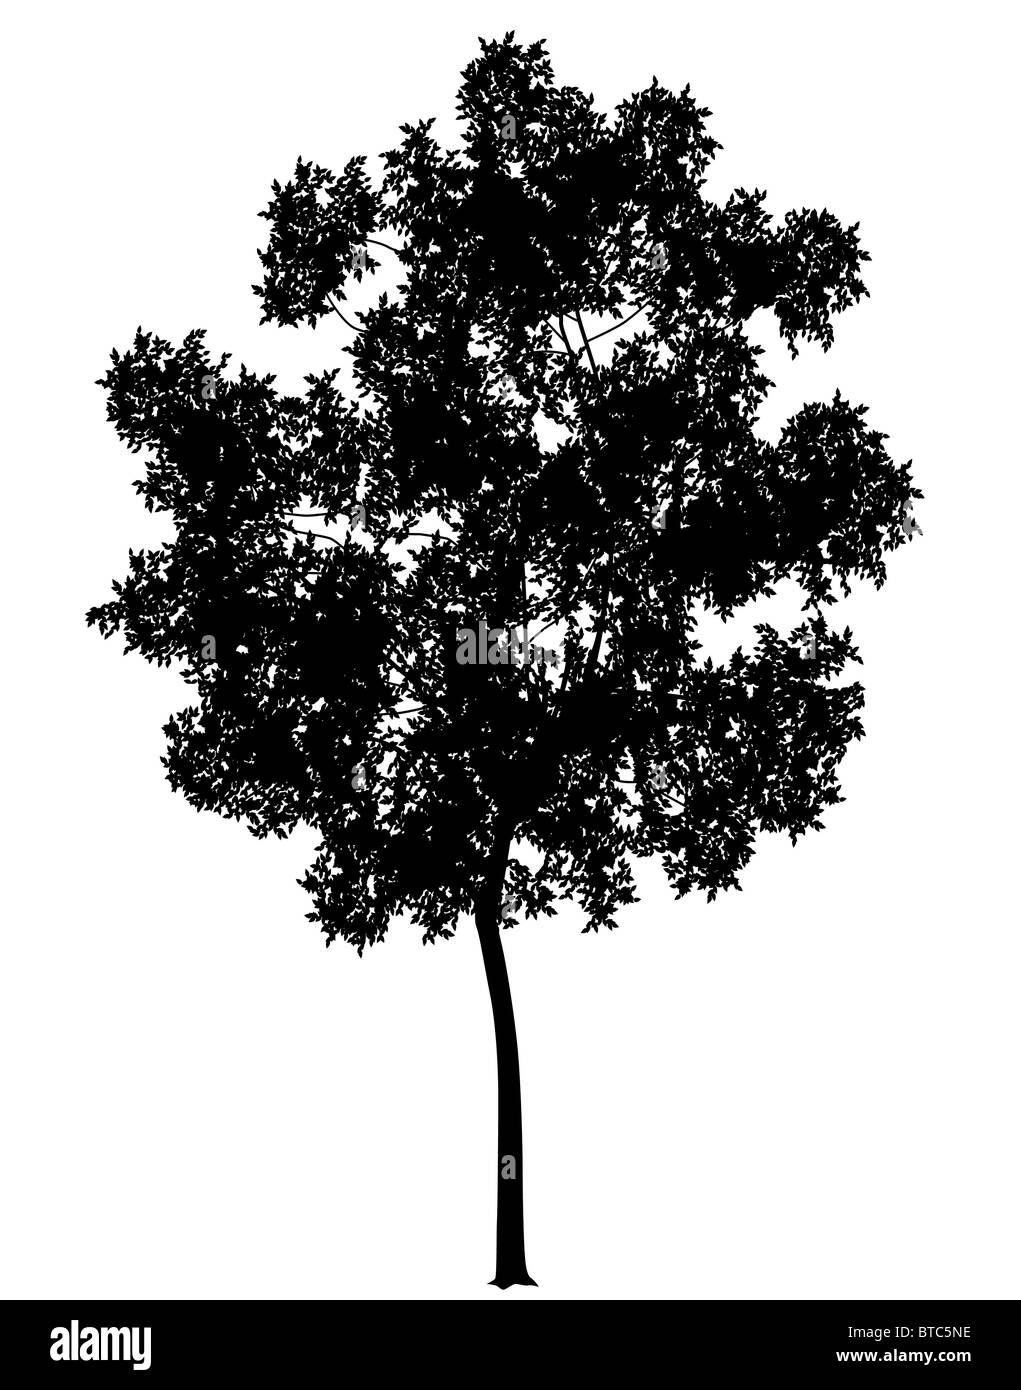 Detailed illustration of a generic tree silhouette Stock Photo